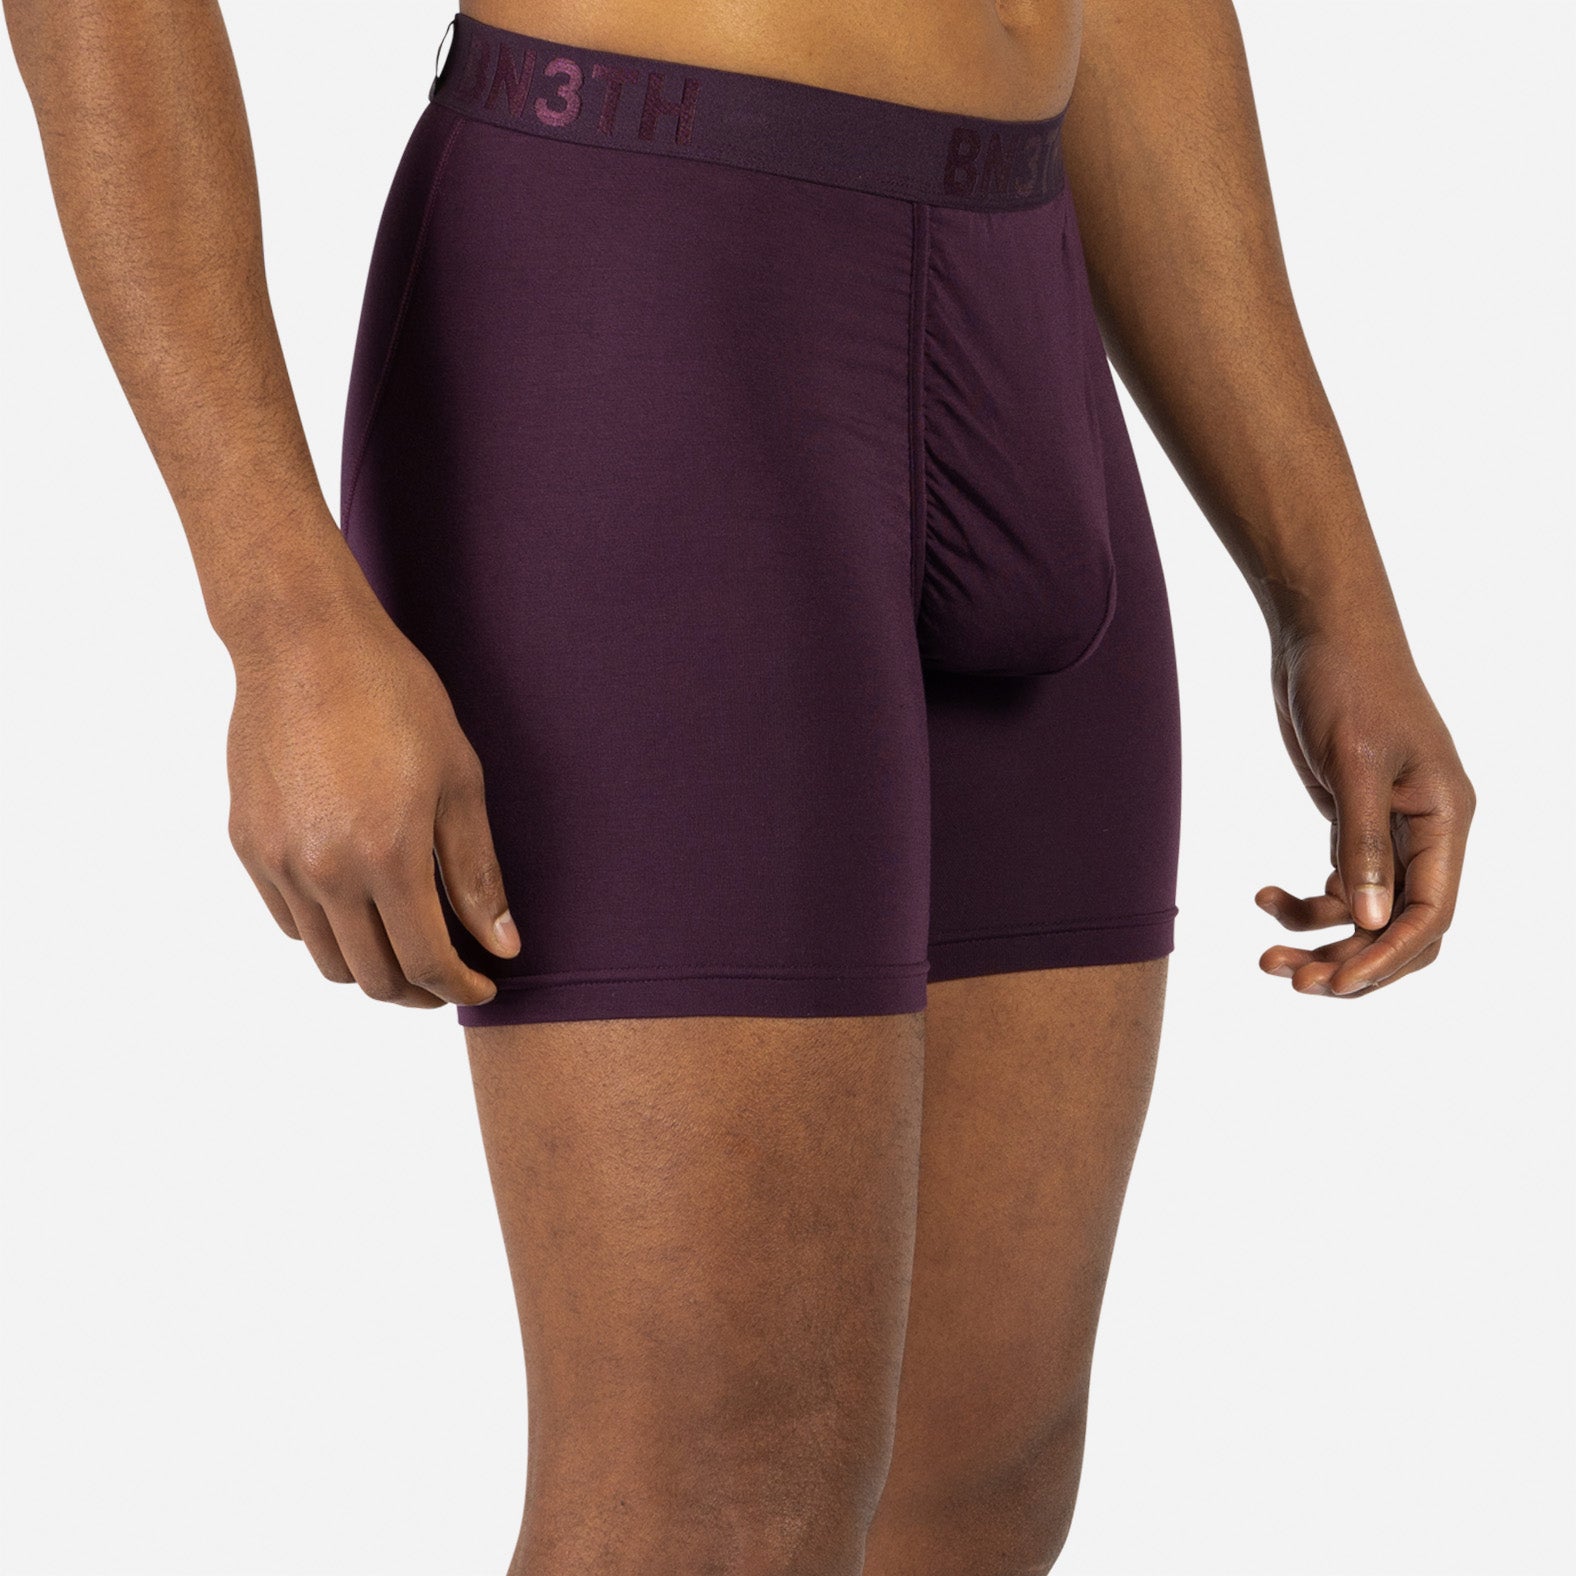 BN3TH Mens Boxer Briefs - Breathable Slim Fit Underwear with Ball Pouch  Support Cabernet, Large